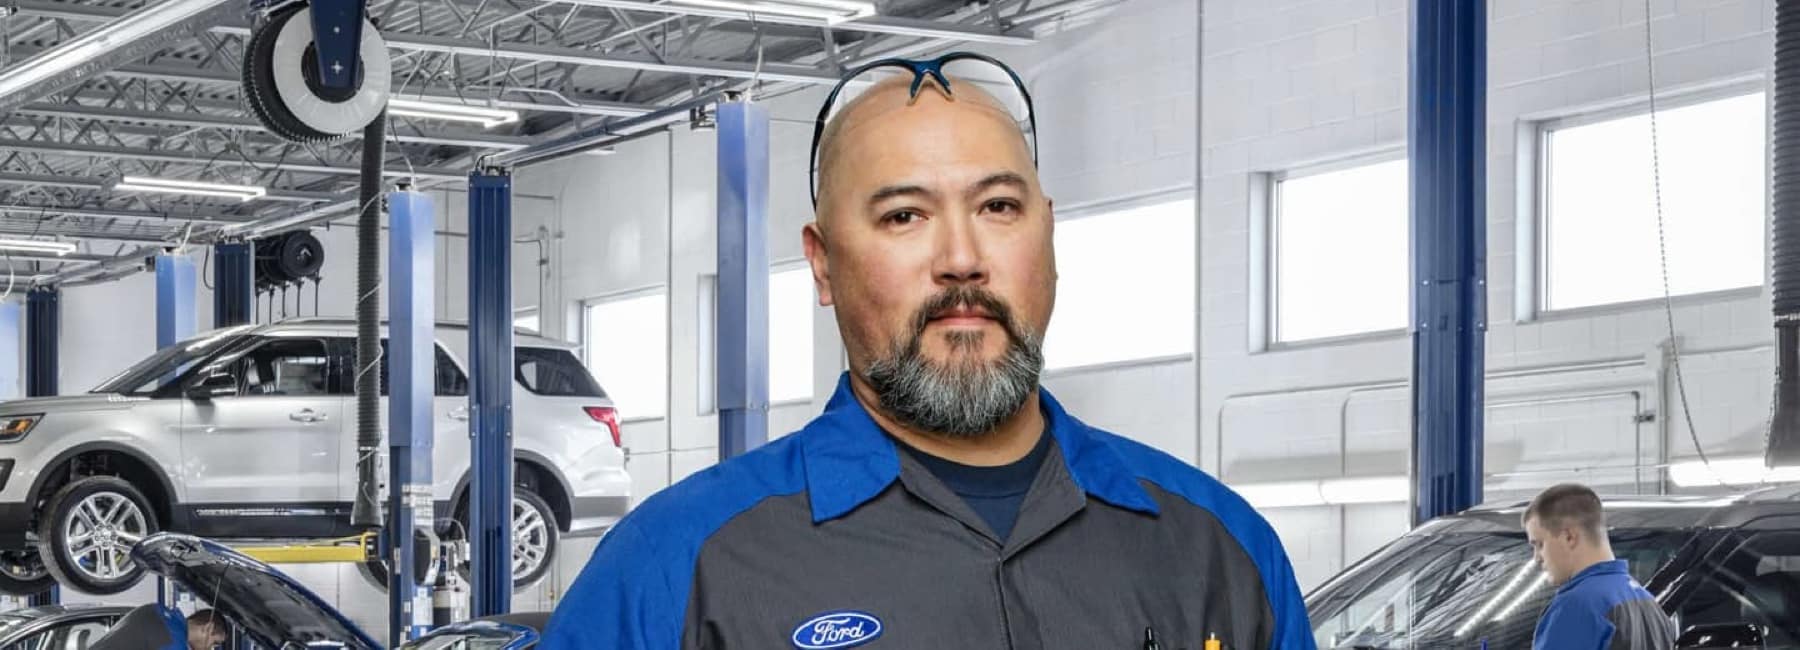 ford-technicians-in-service-bay-working